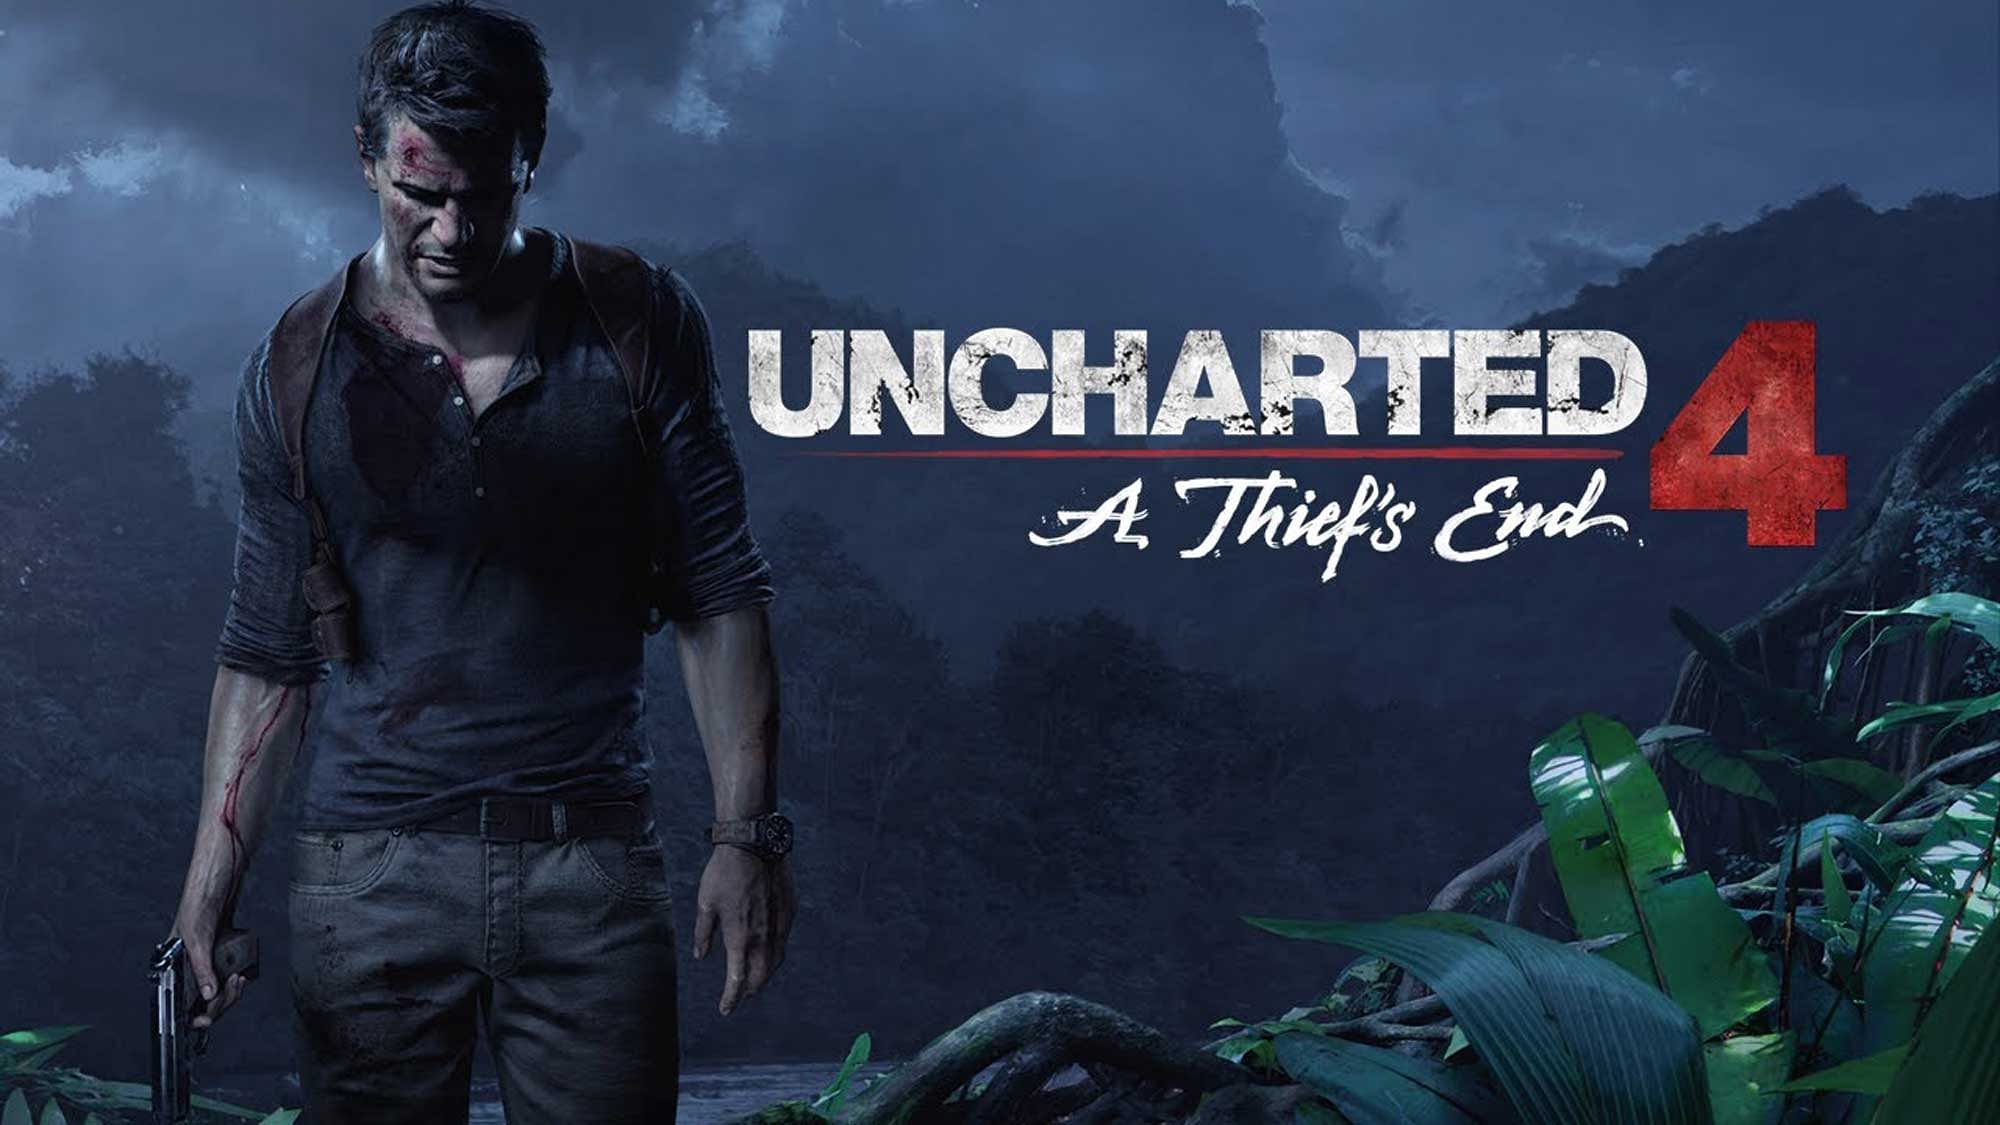 Uncharted 4 worldwide release date has been now pushed to May 10, 2016. (Photo: PlayStation)